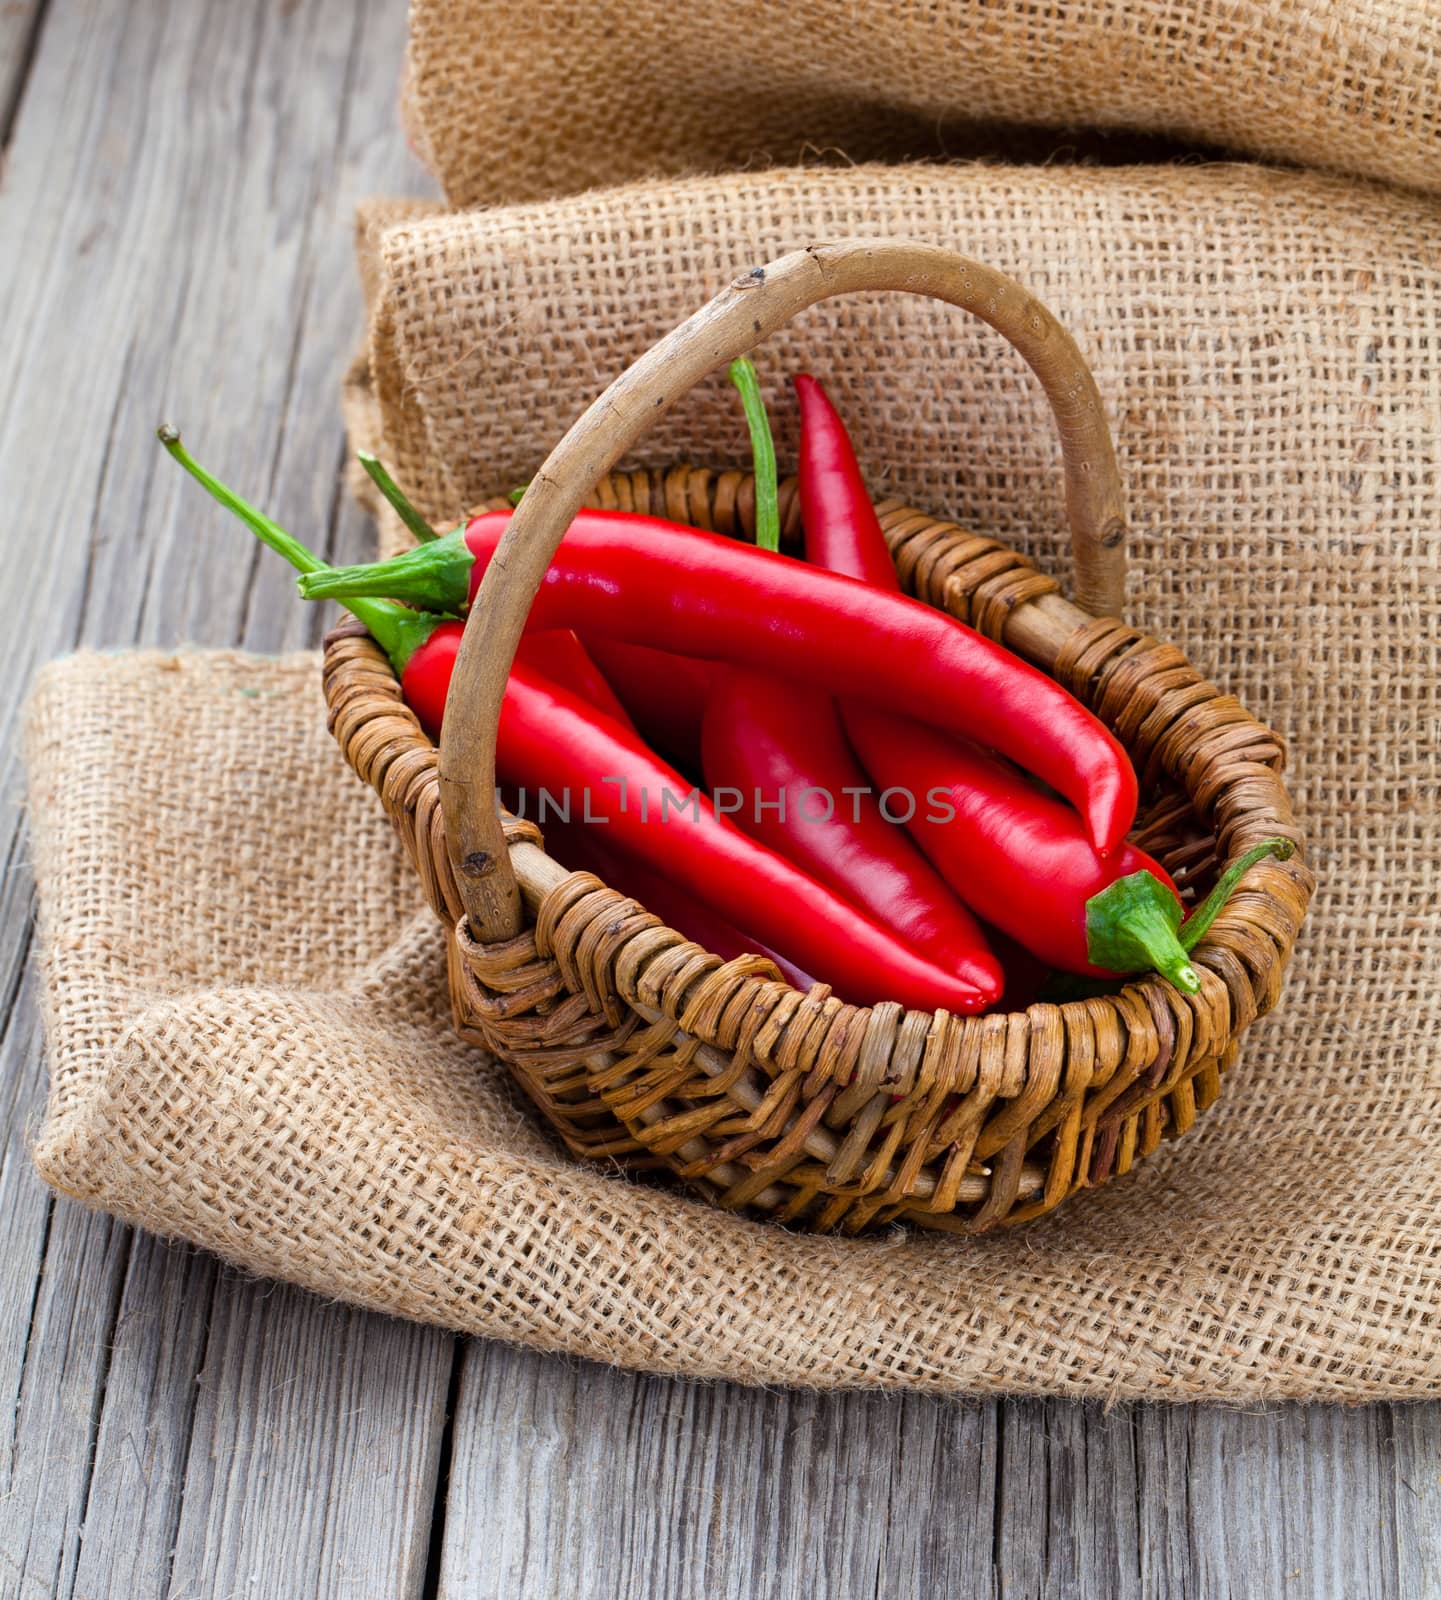 Red chili pepper in a wicker basket with burlap on the wooden ba by motorolka